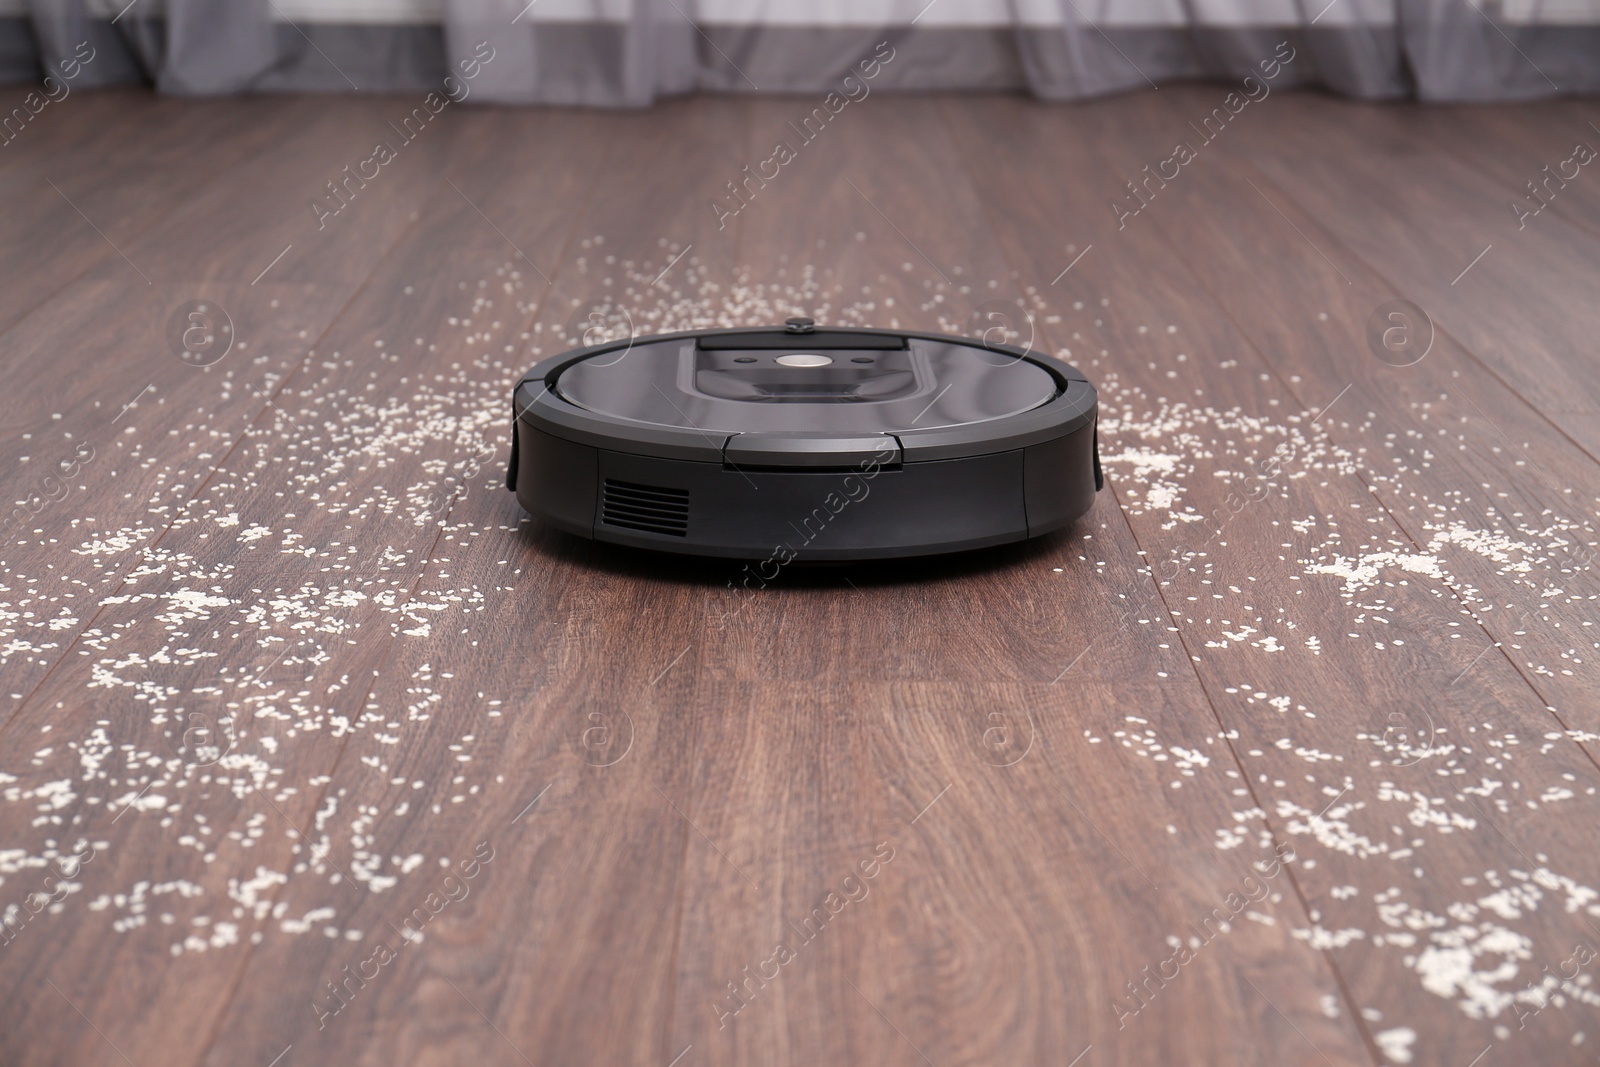 Photo of Removing groats from wooden floor with robotic vacuum cleaner at home